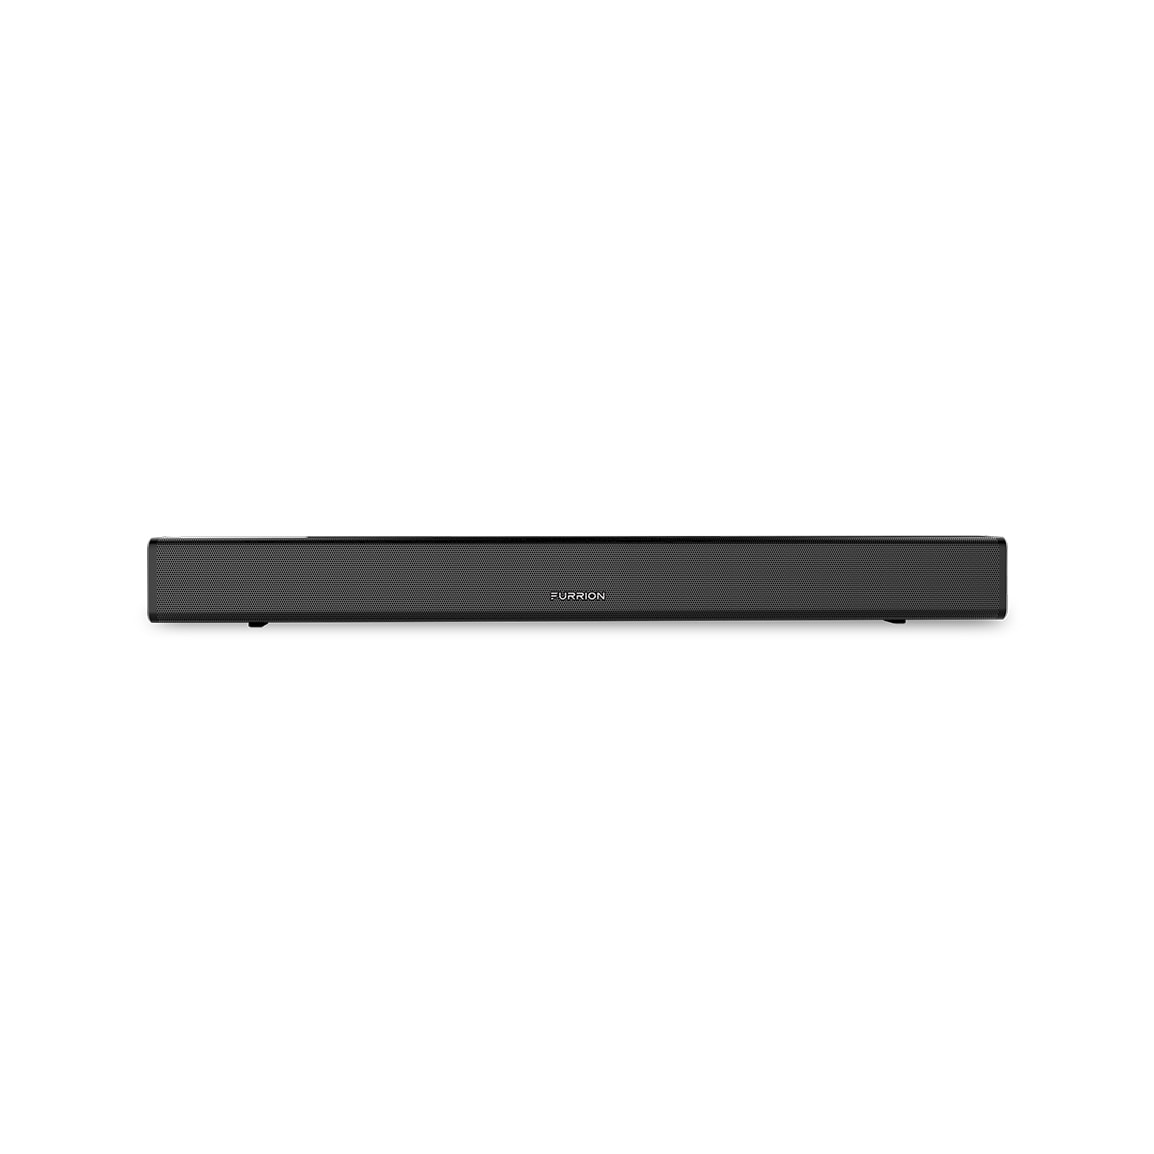 fjols Sømil pude Furrion Outdoor Soundbar with Built in Subwoofer 36-in 2160p (4K) LED Full  Sun Flat Screen Tv in the TVs department at Lowes.com